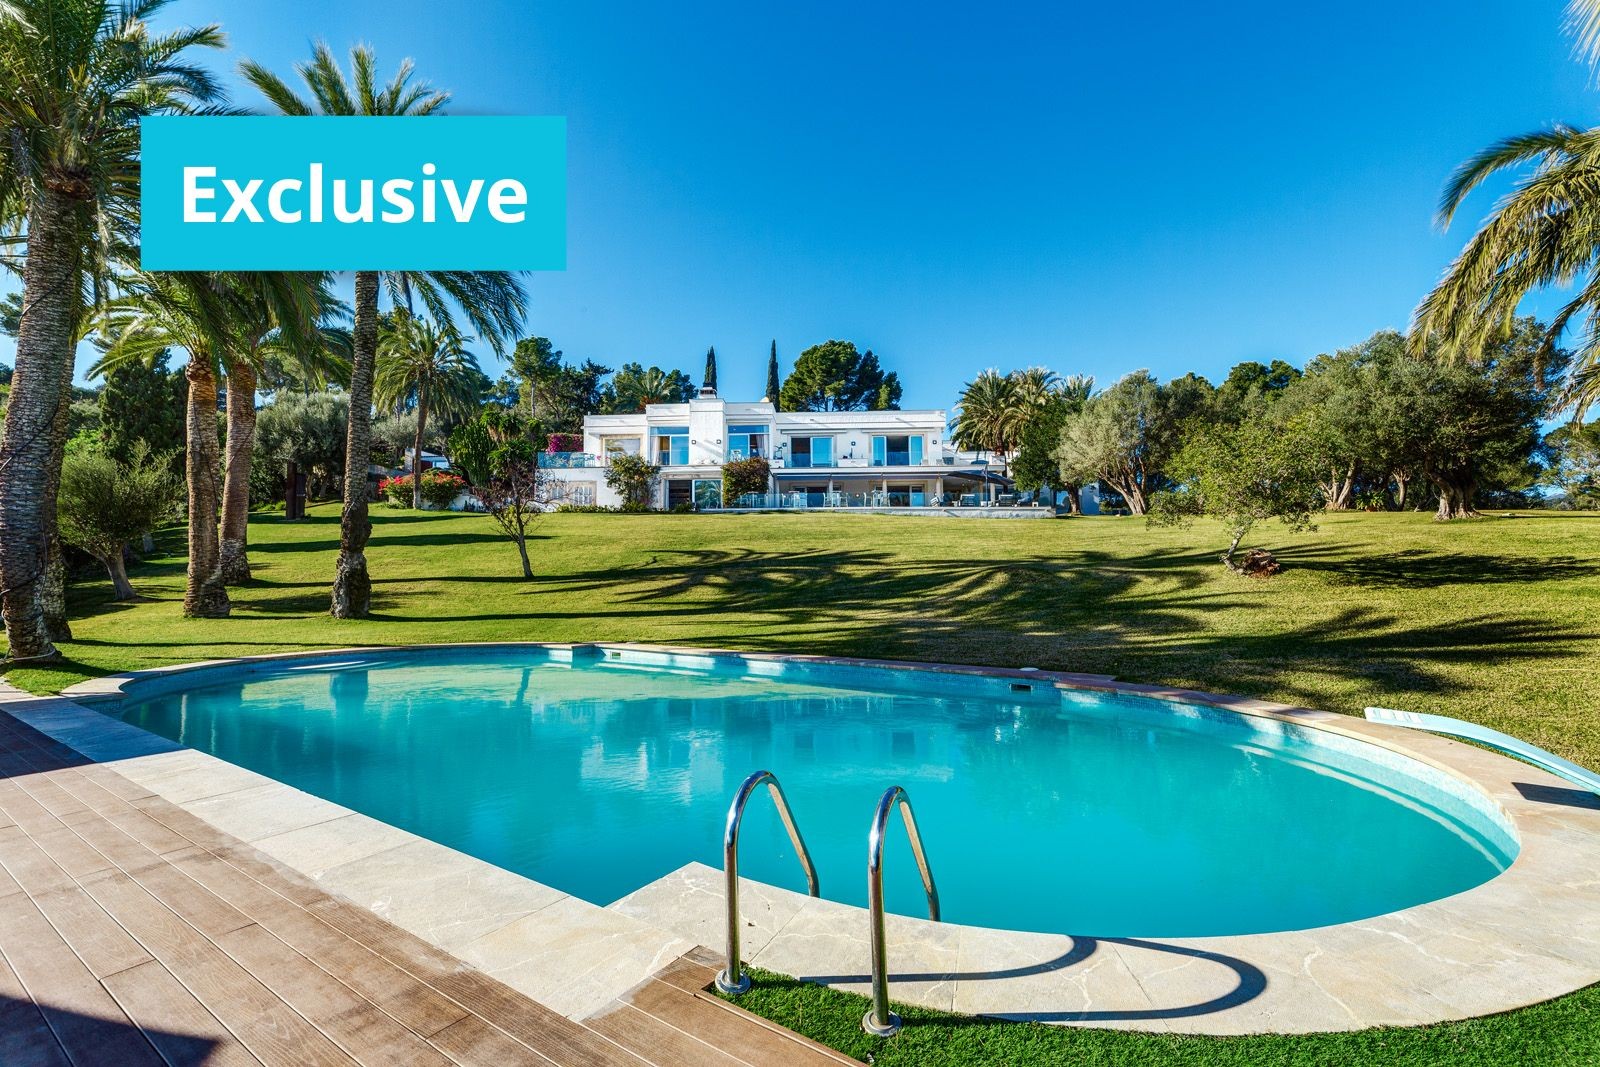 Stunning property in Son Vida with absolute privacy and panoramic view over the bay of Palma